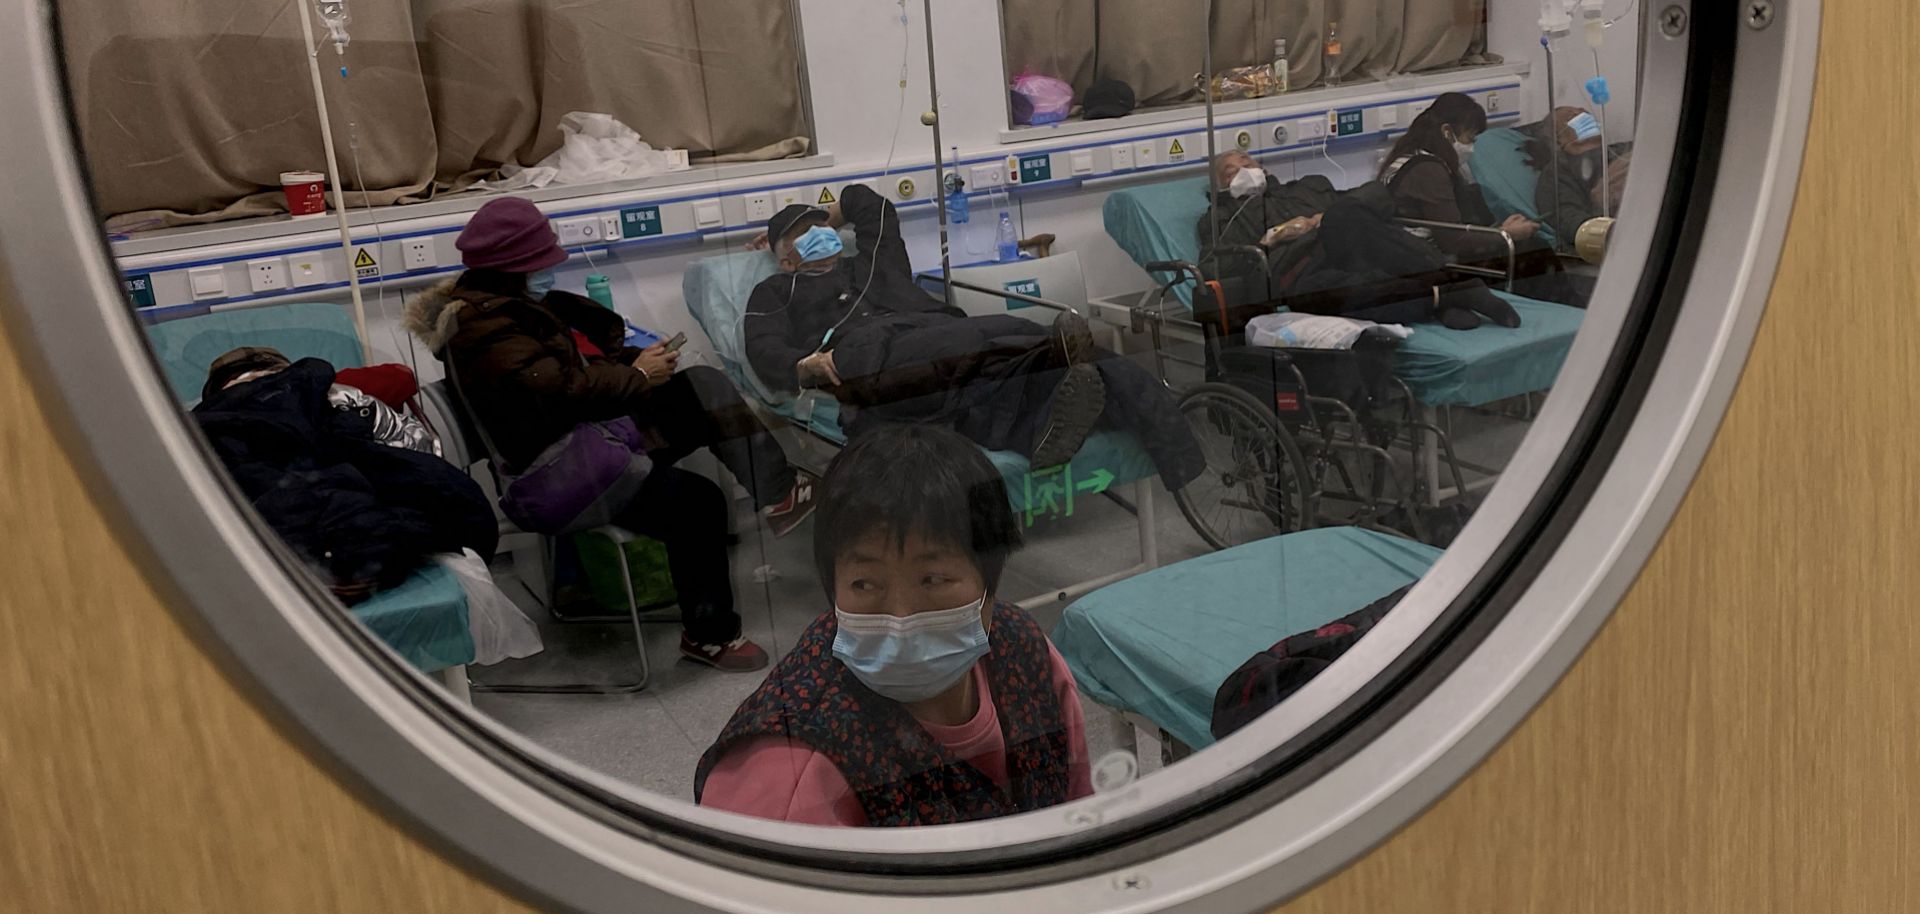 COVID-19 patients are seen on beds at a hospital in Tianjin, China, on Dec. 28, 2022.